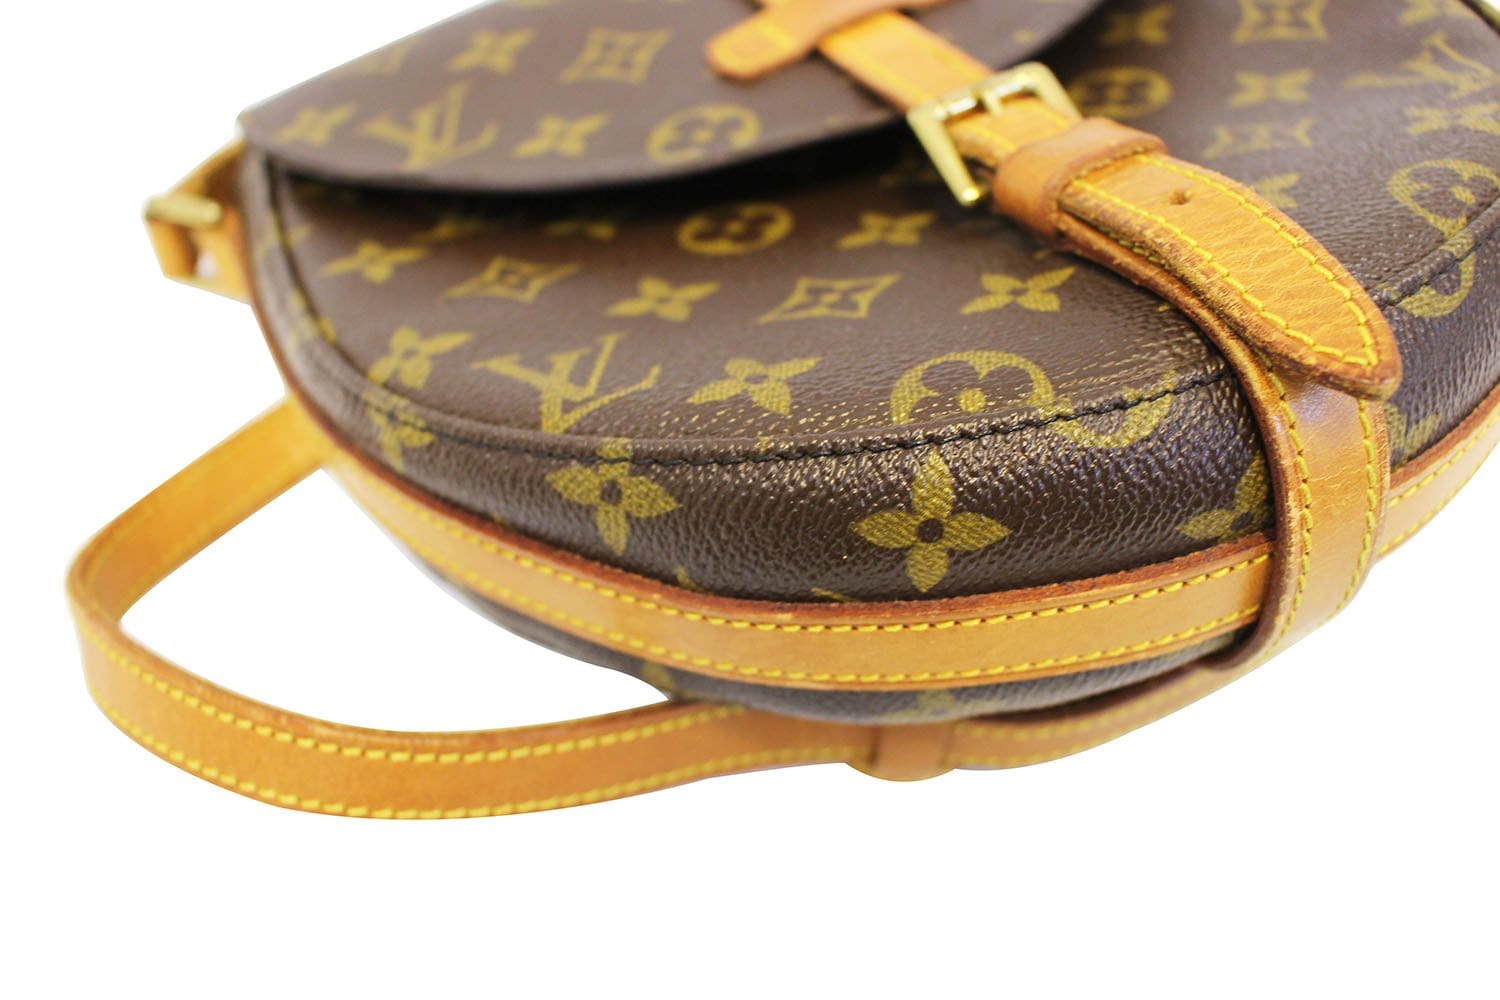 Chantilly PM Monogram Canvas Leather